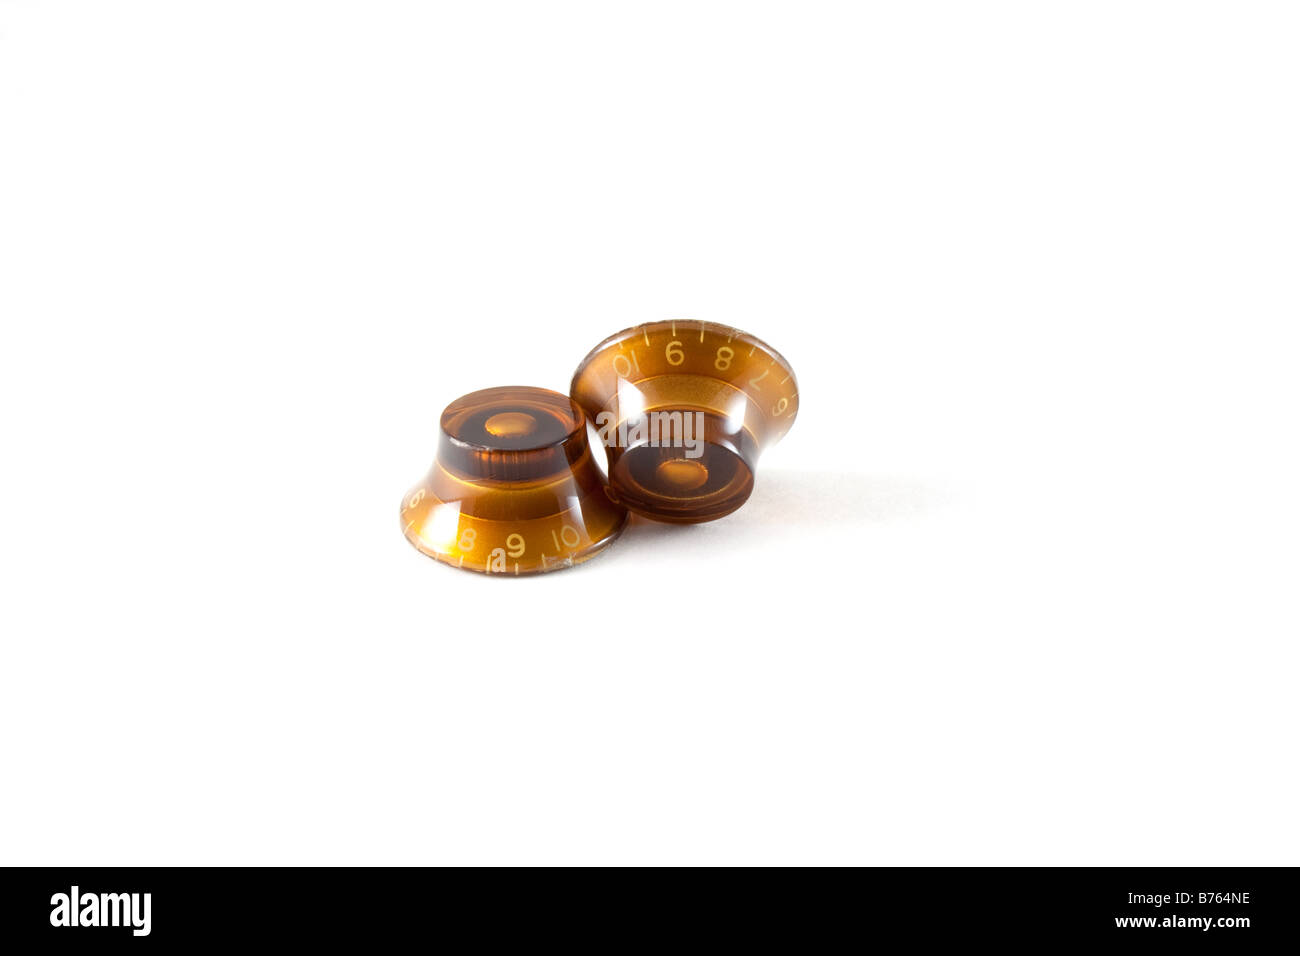 Old amber colored guitar knobs Stock Photo